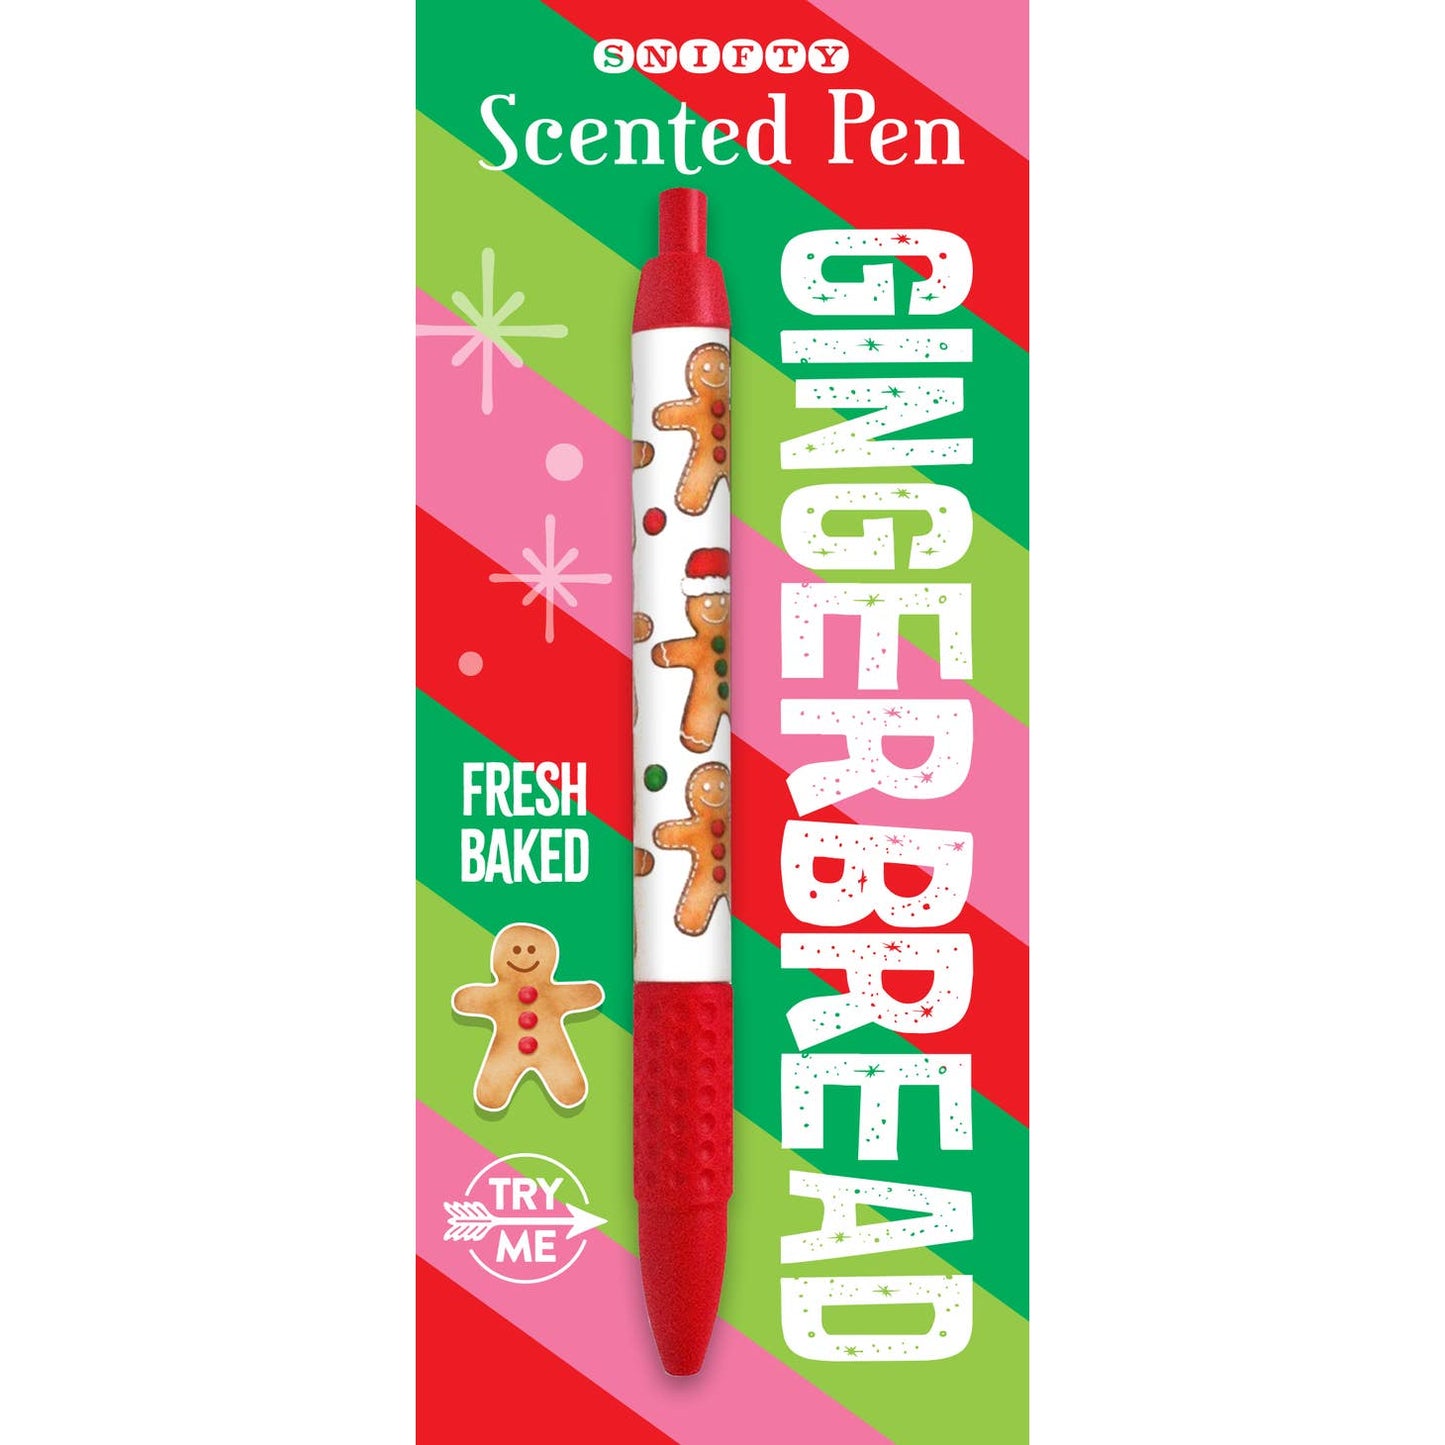 Gingerbread Scented Pen | Giftable Pen | Holidays, Christmas | Novelty Office Desk Supplies